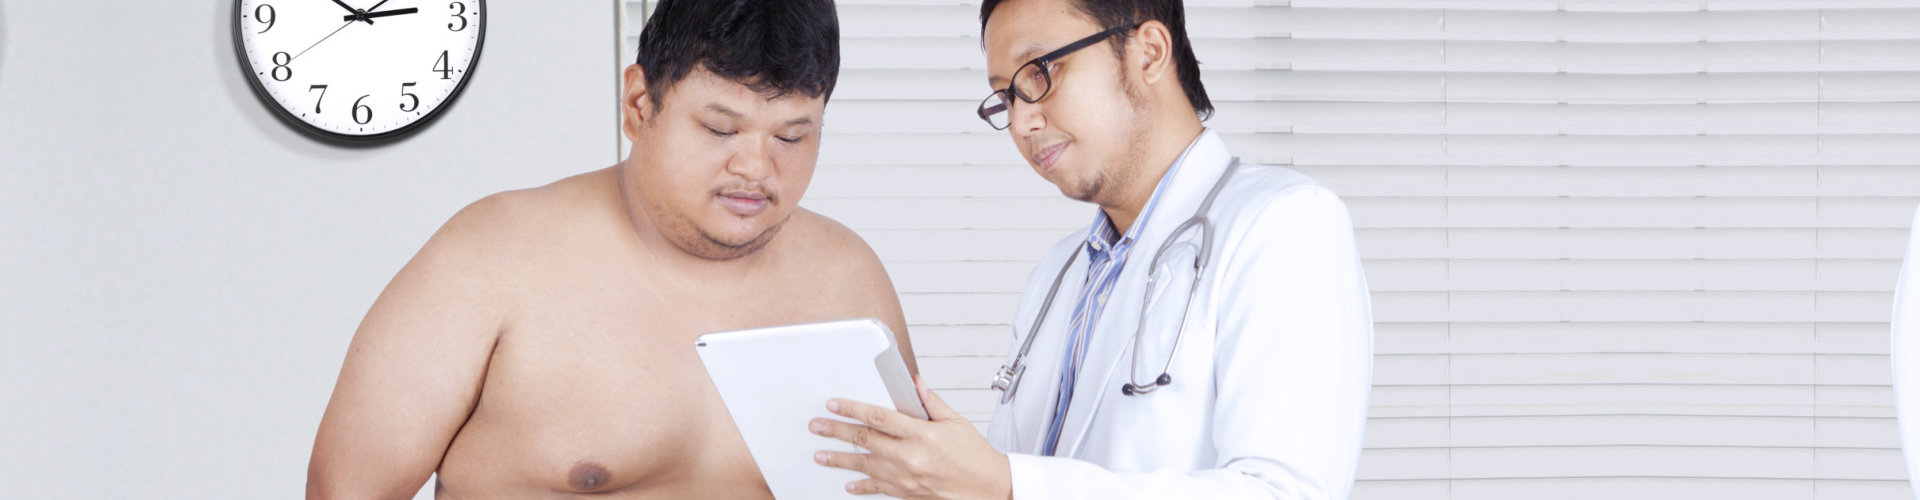 doctor showing results to his patient